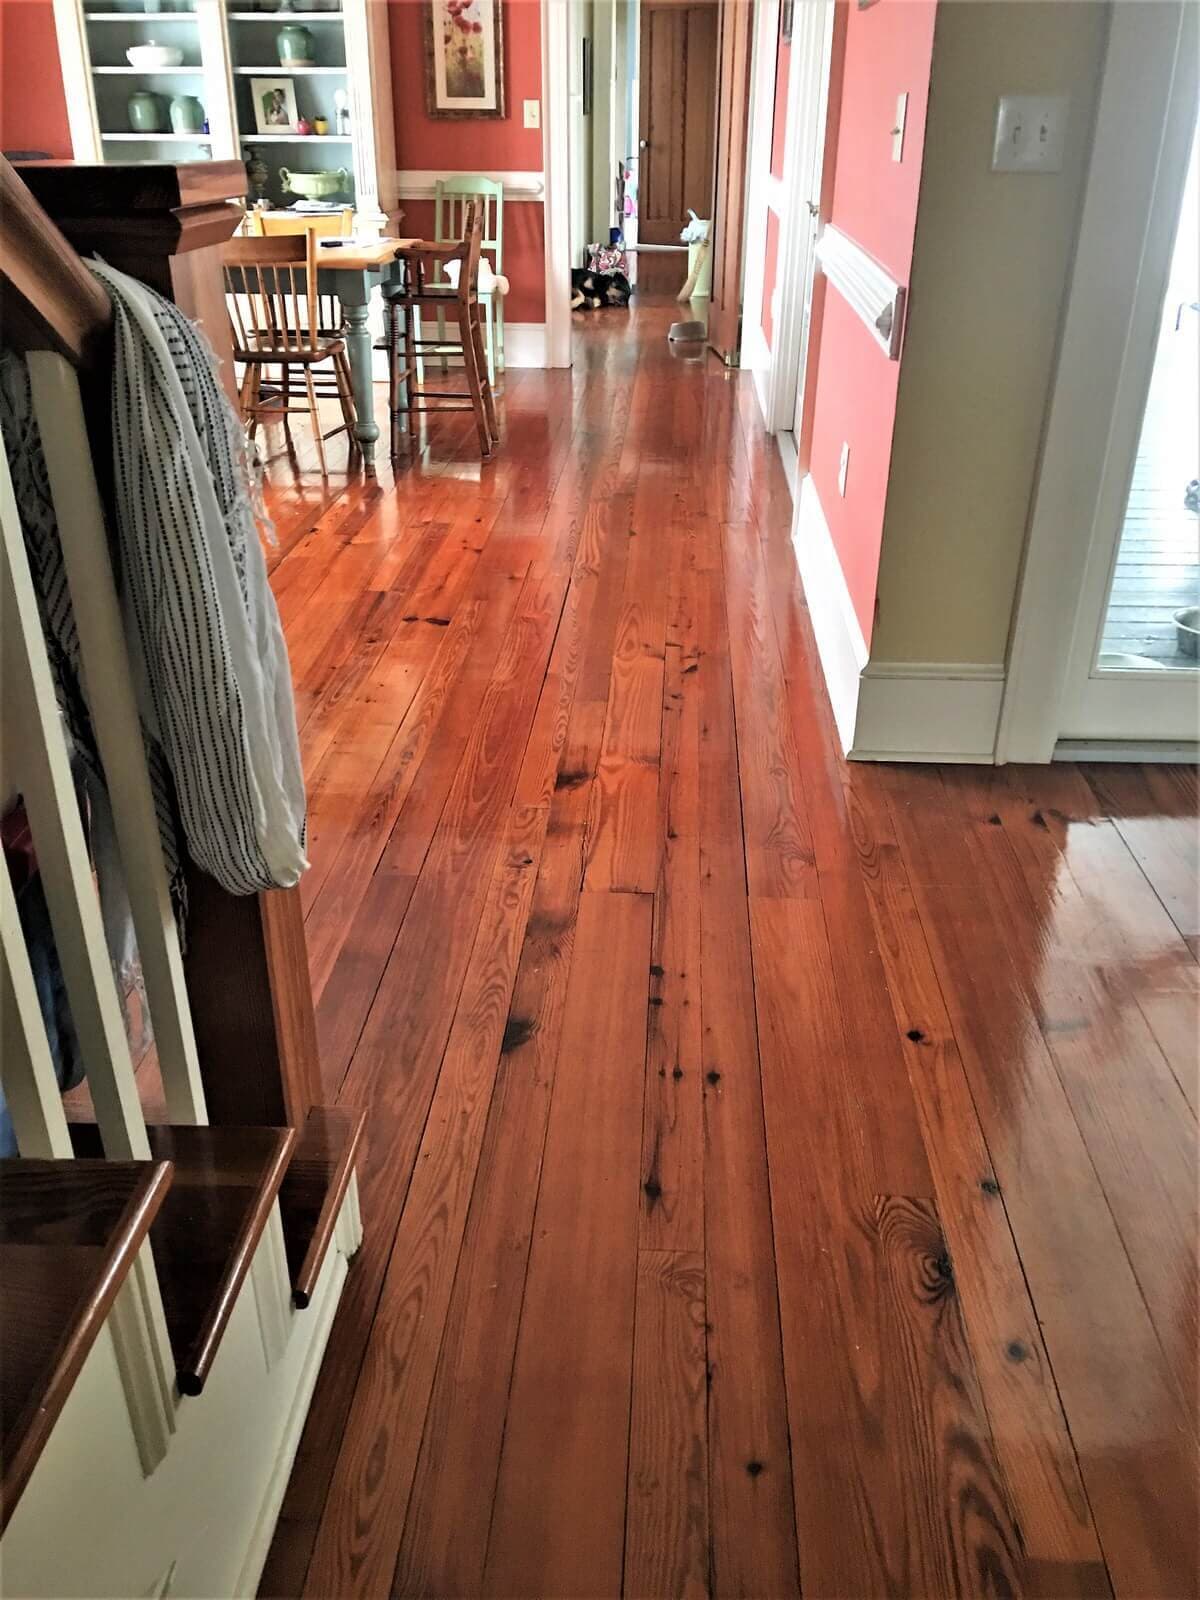 Heart pine plain sawn  flooring in a pink room in East Amherst, ny